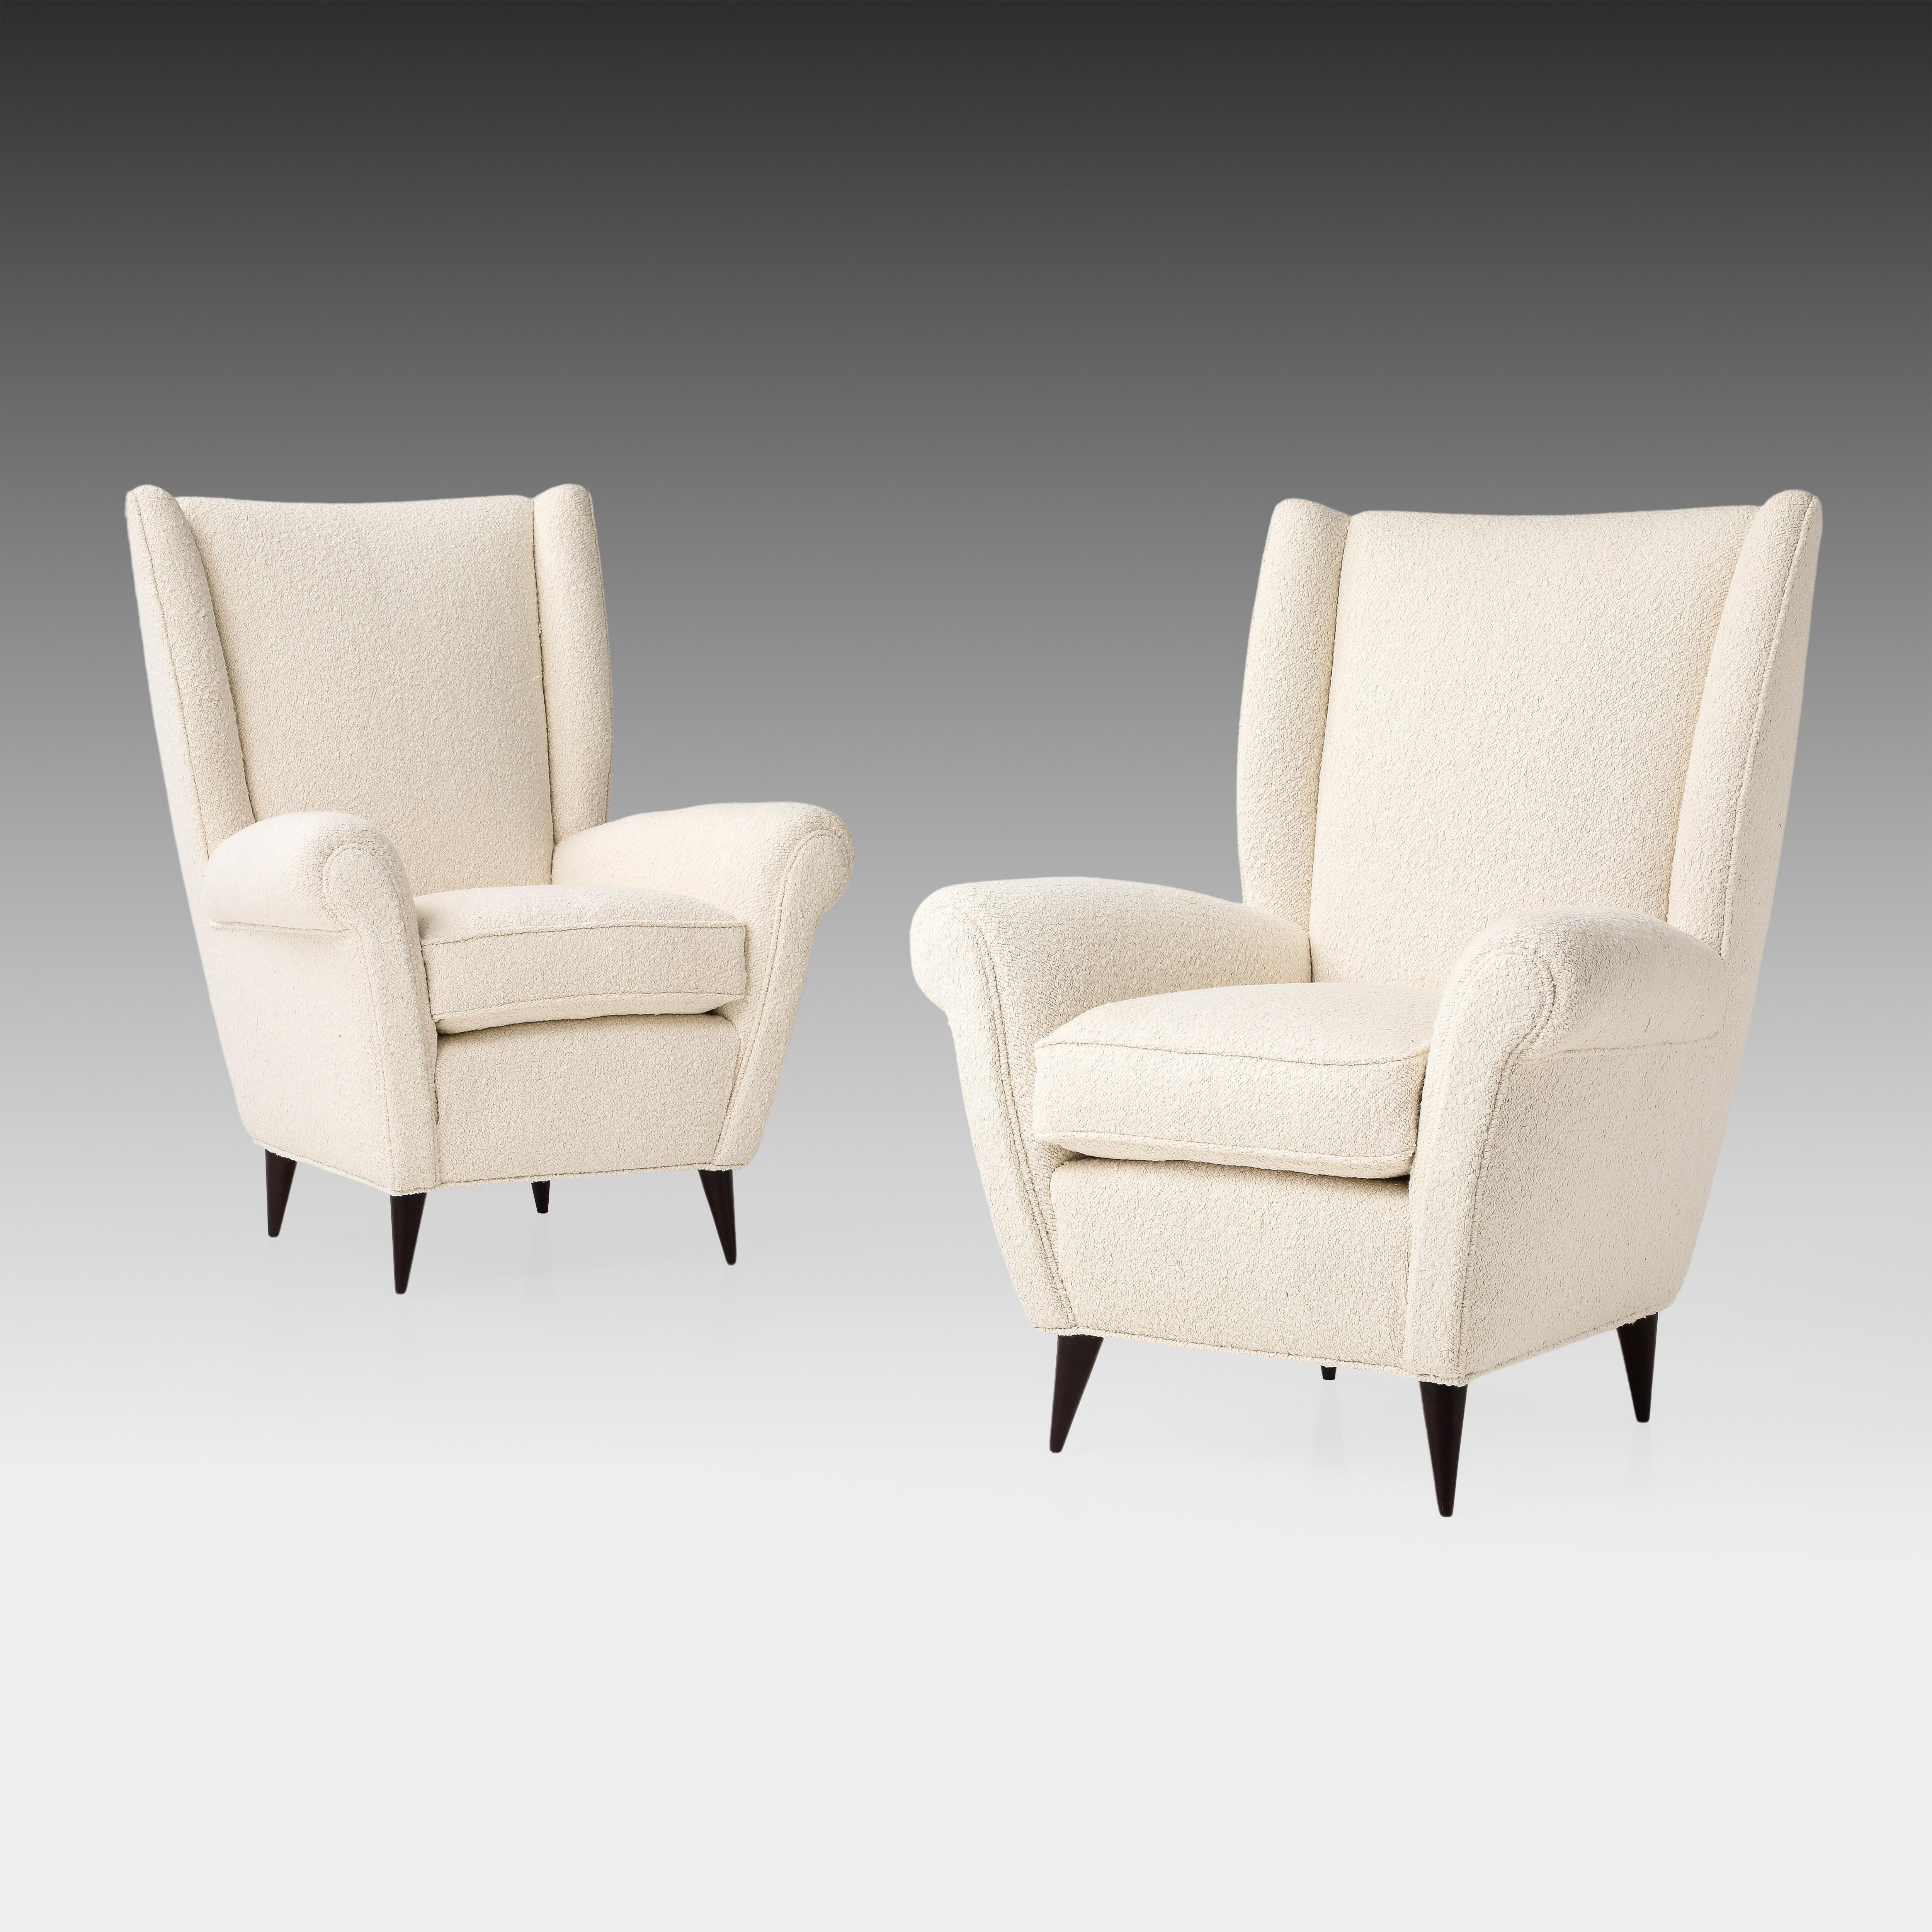 Wood Gio Ponti Pair of High Back Armchairs in Ivory Bouclé, 1950s For Sale